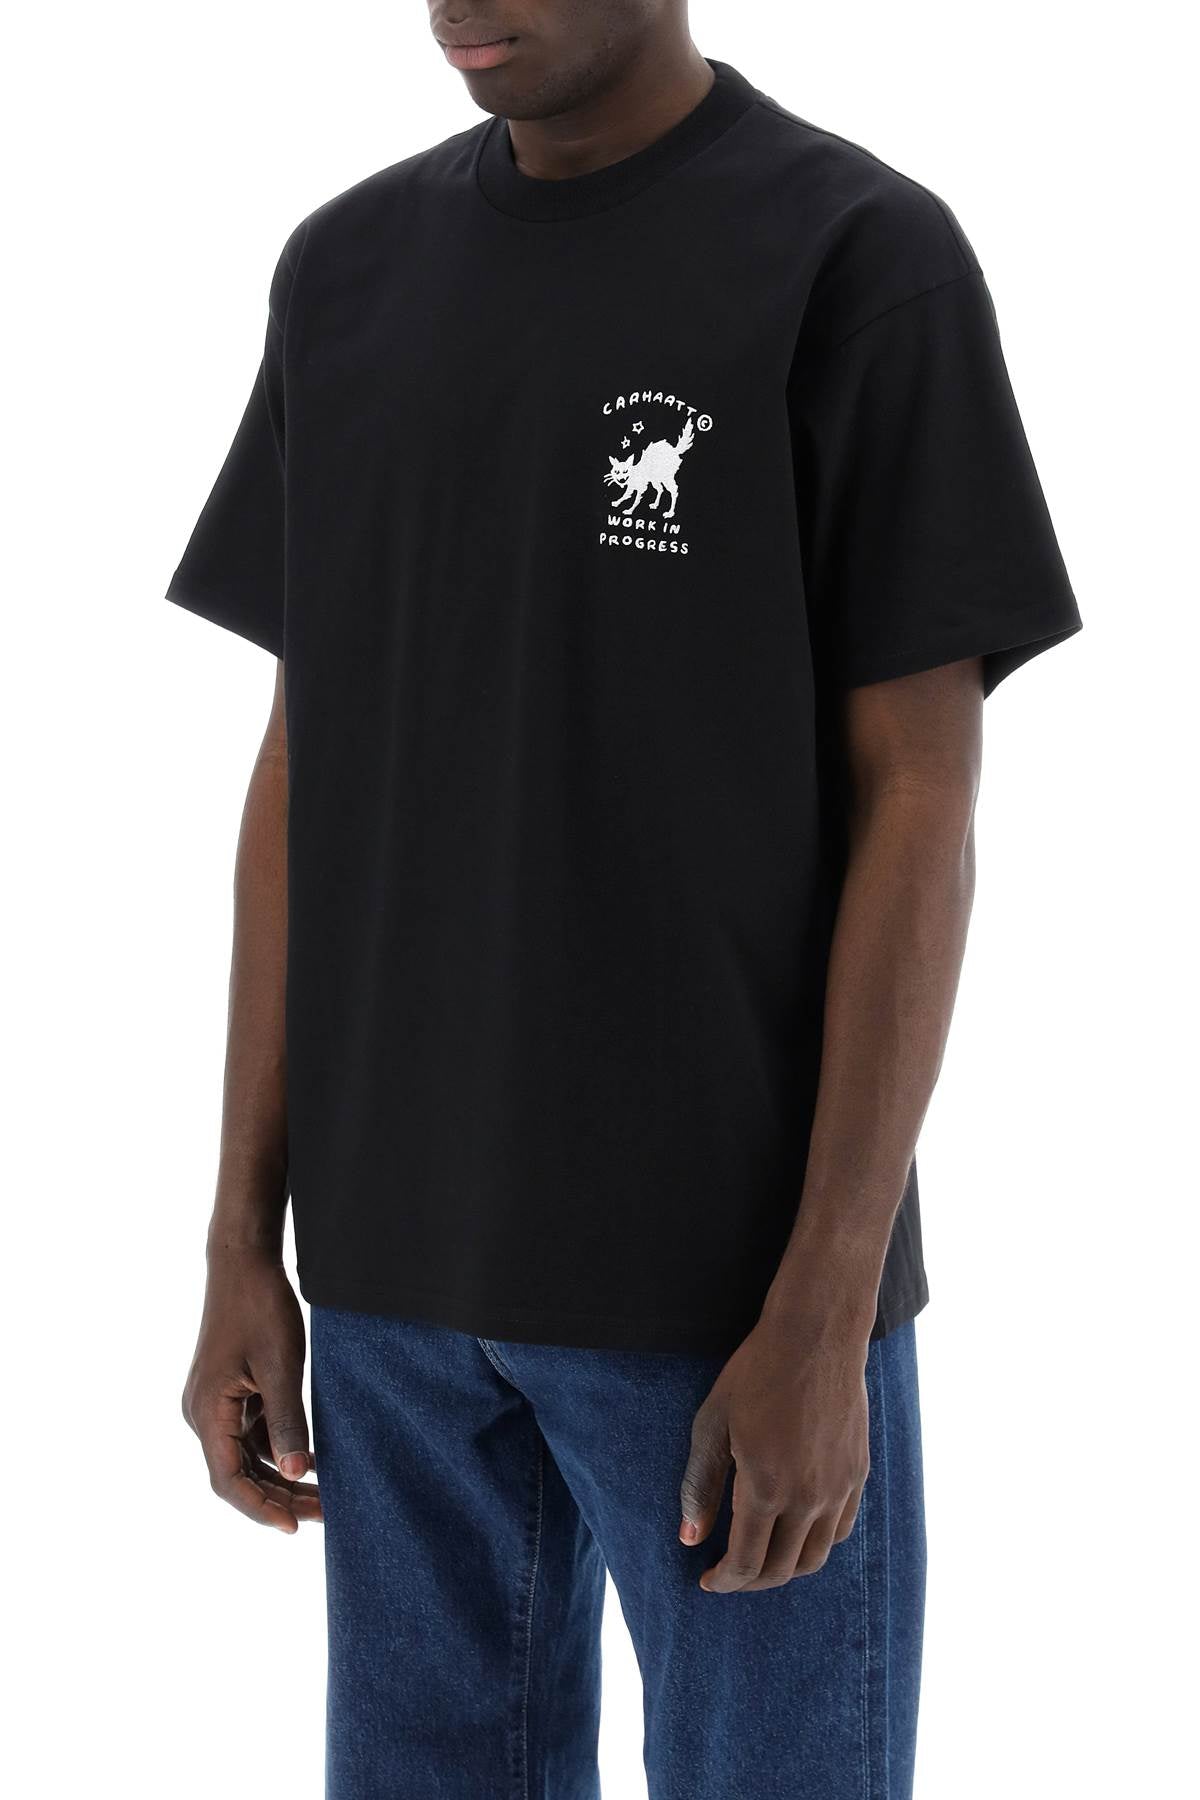 Carhartt wip "graphic embroidered icons t-shirt with-3